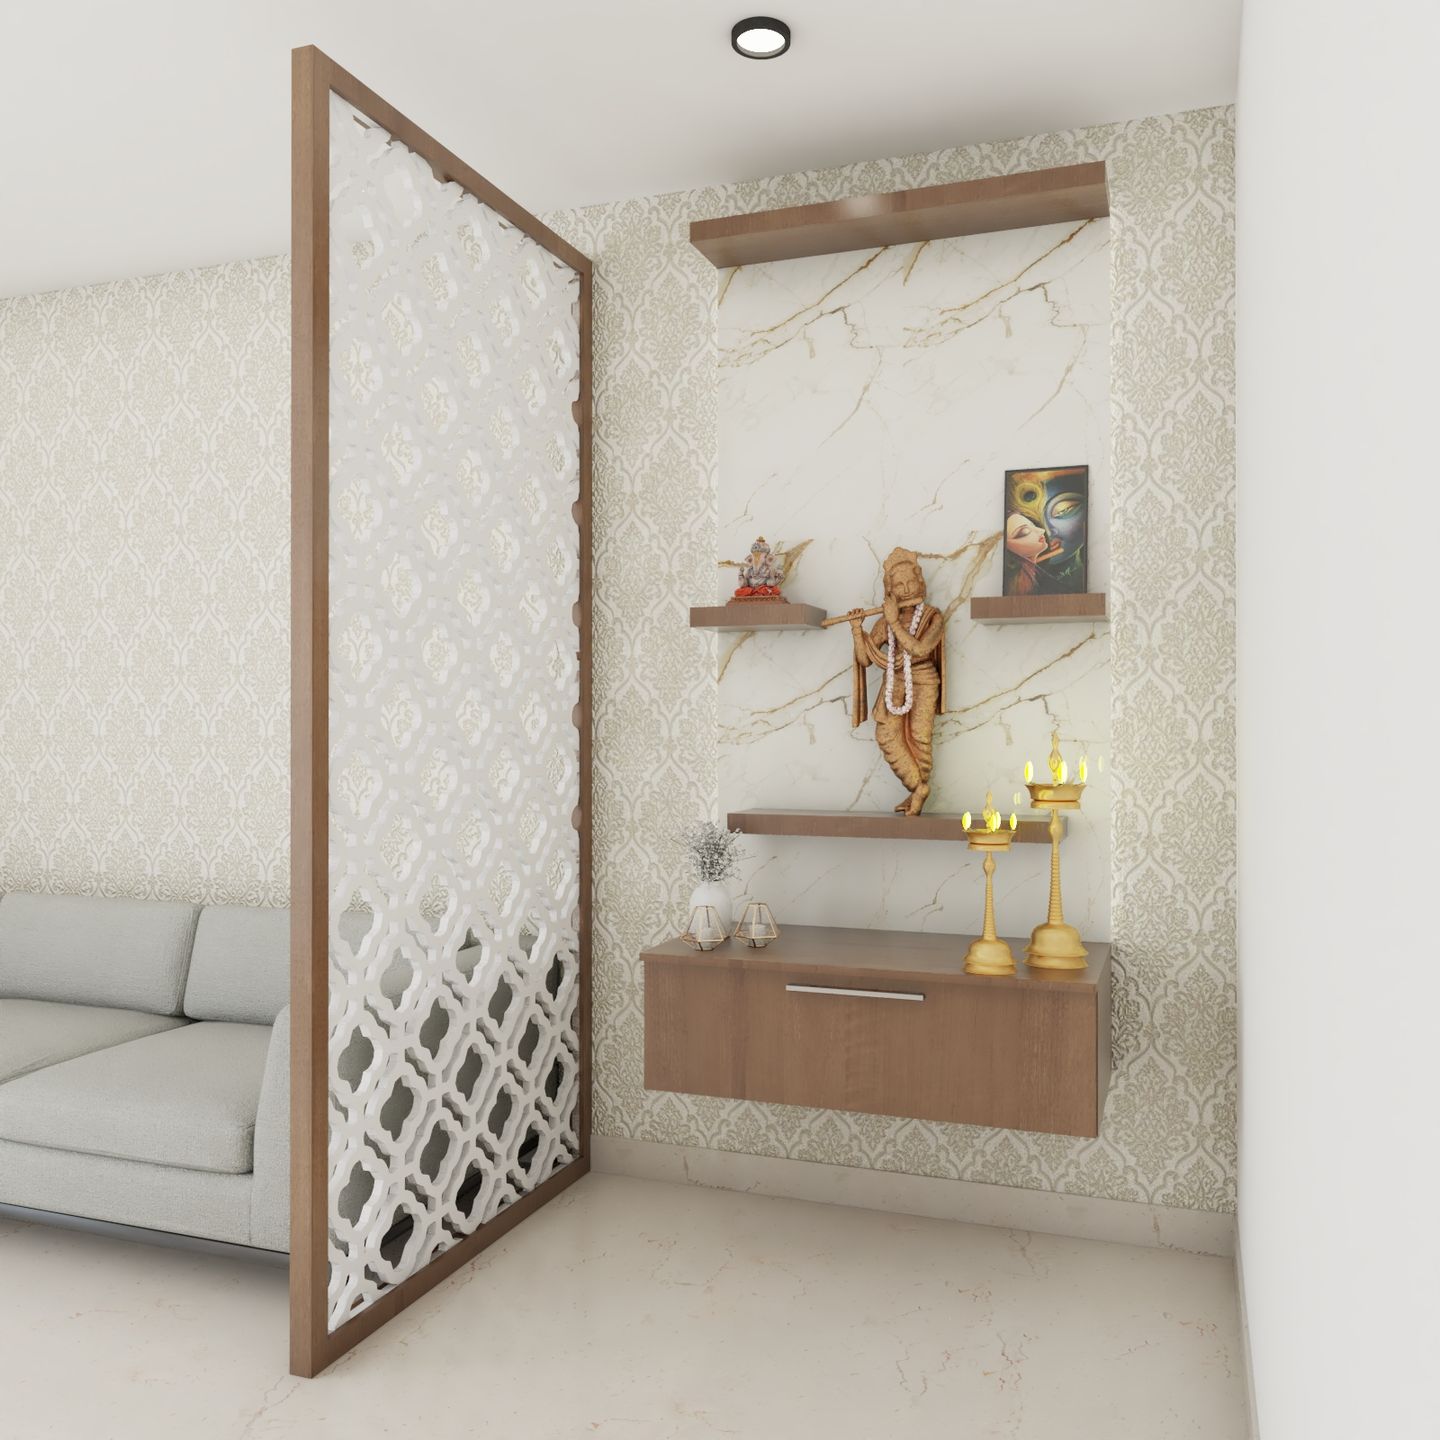 Pooja Room Design With CNC Cut Partition And Wooden Frame - Livspace